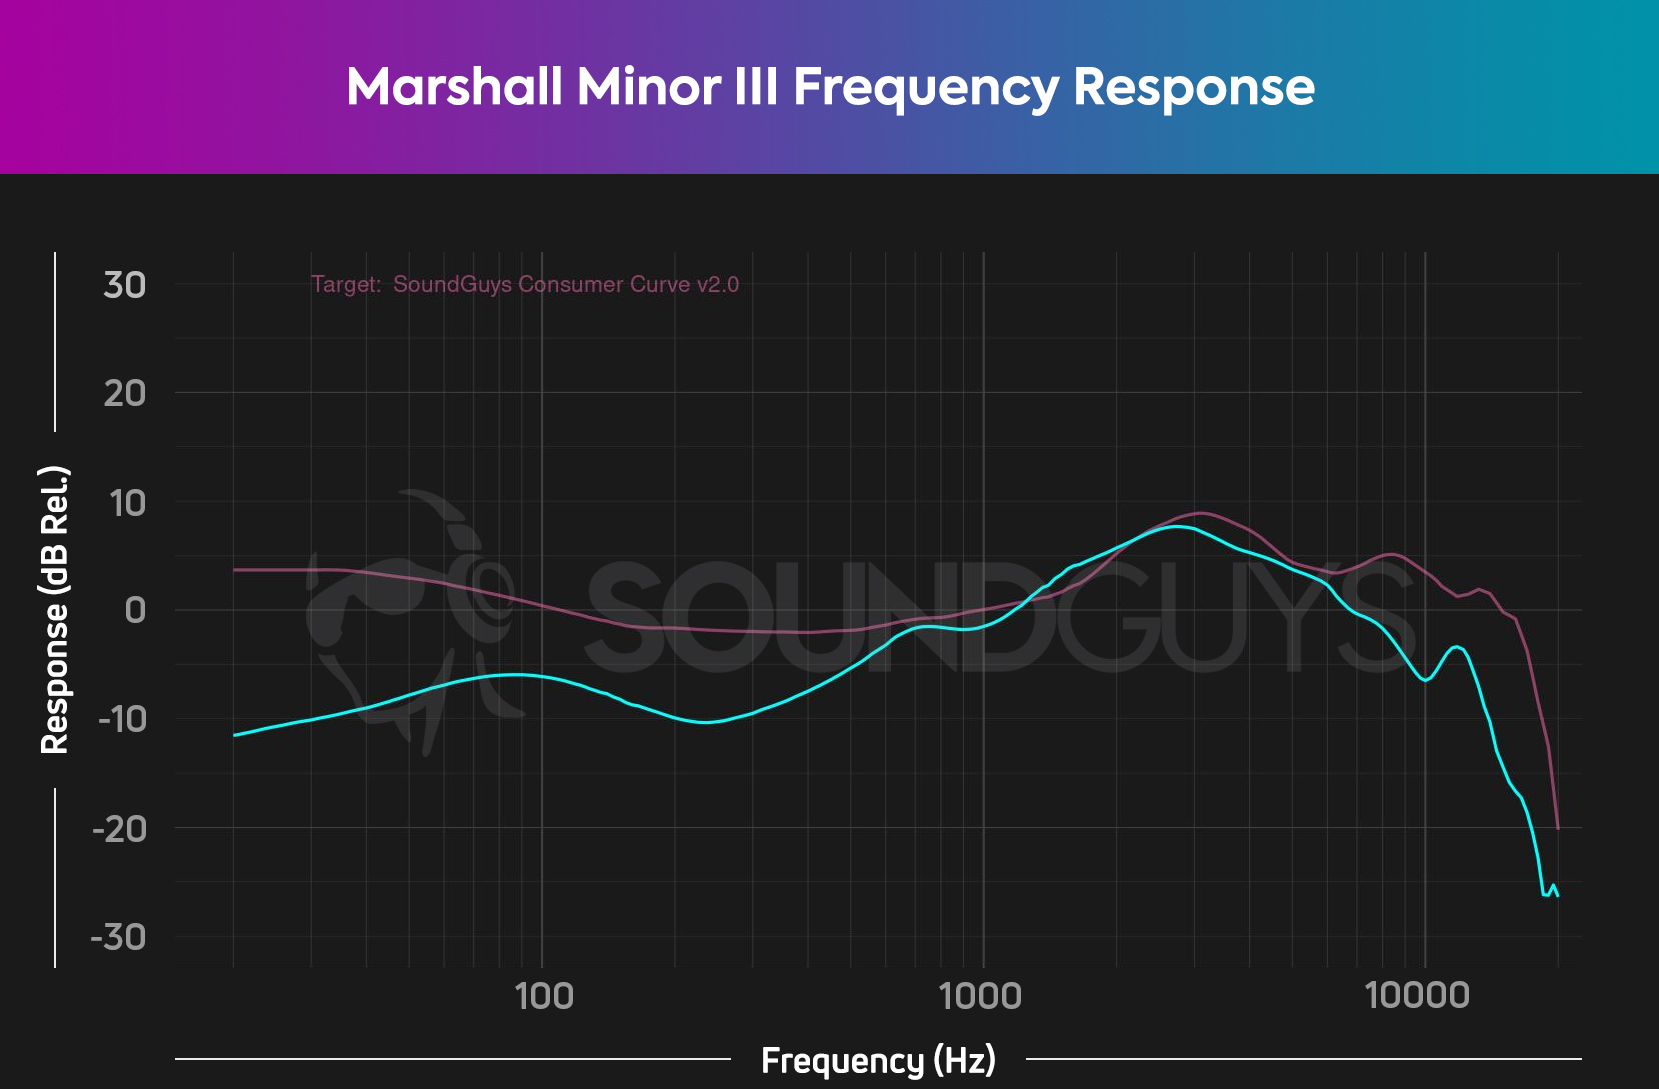 Marshall Minor III fit - finish SoundGuys Poor and review